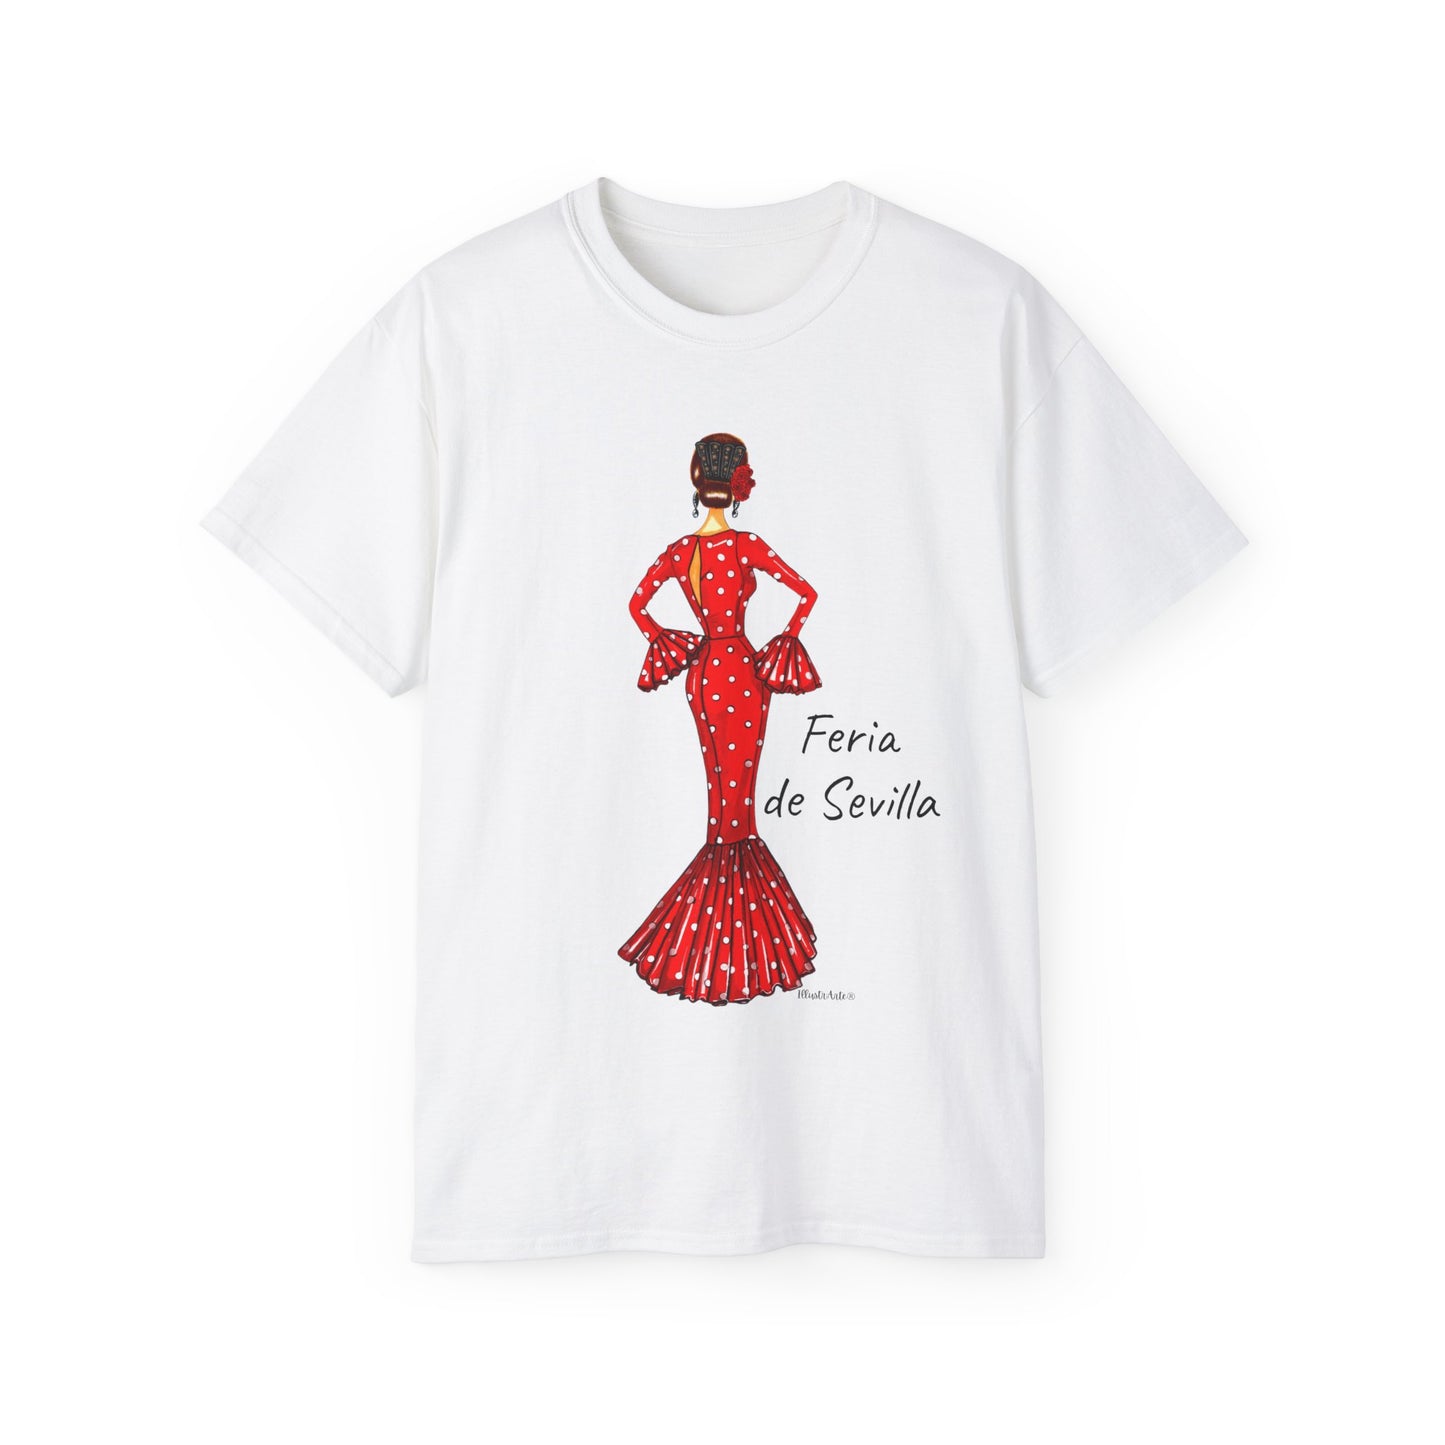 Limited Edition Seville Fair in Miami White classic customizable tee